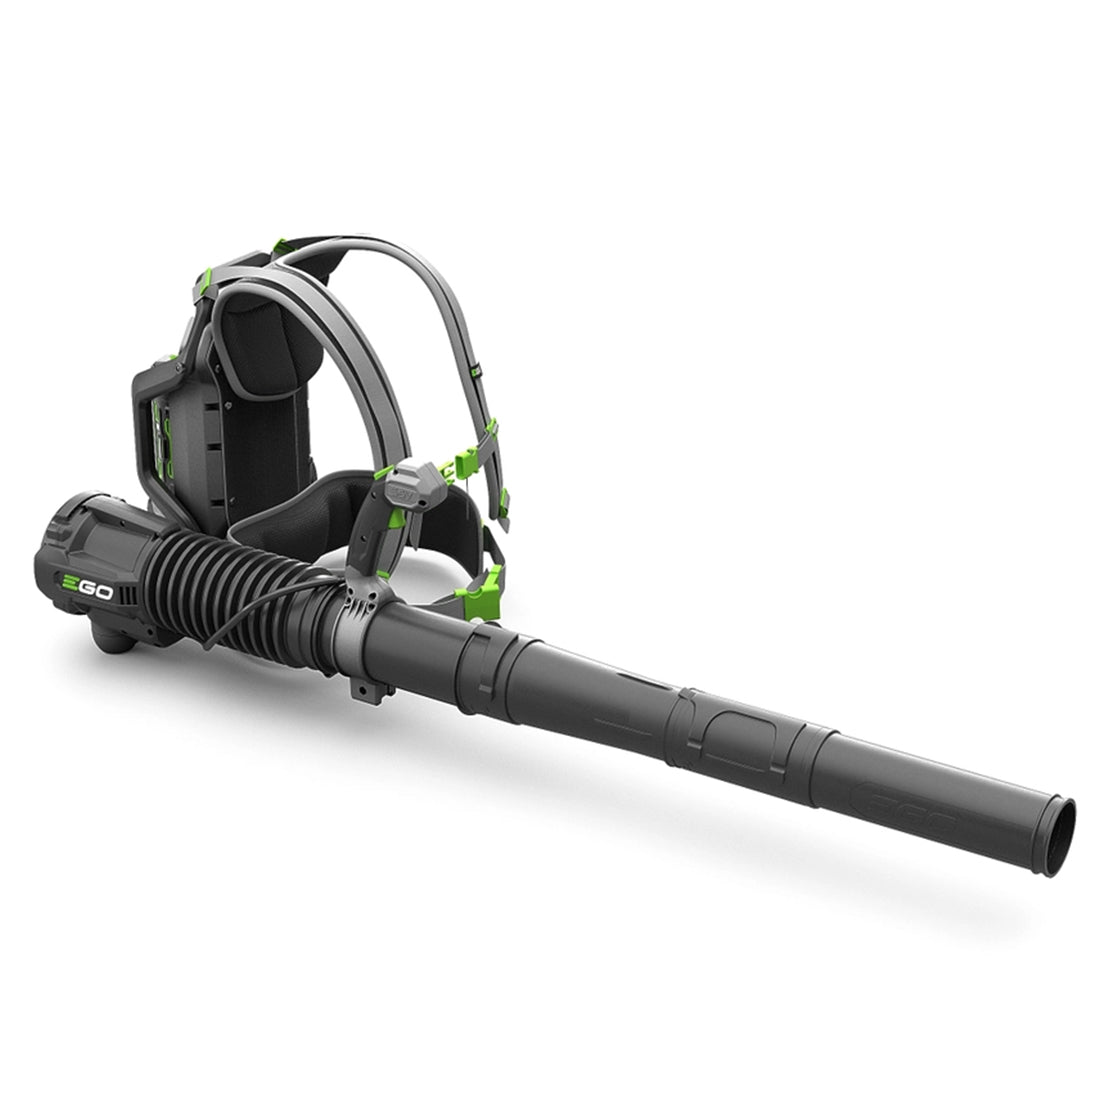 EGO Power+ 600 CFM Backpack Blower with G3 7.5ah Battery, 210w Charger